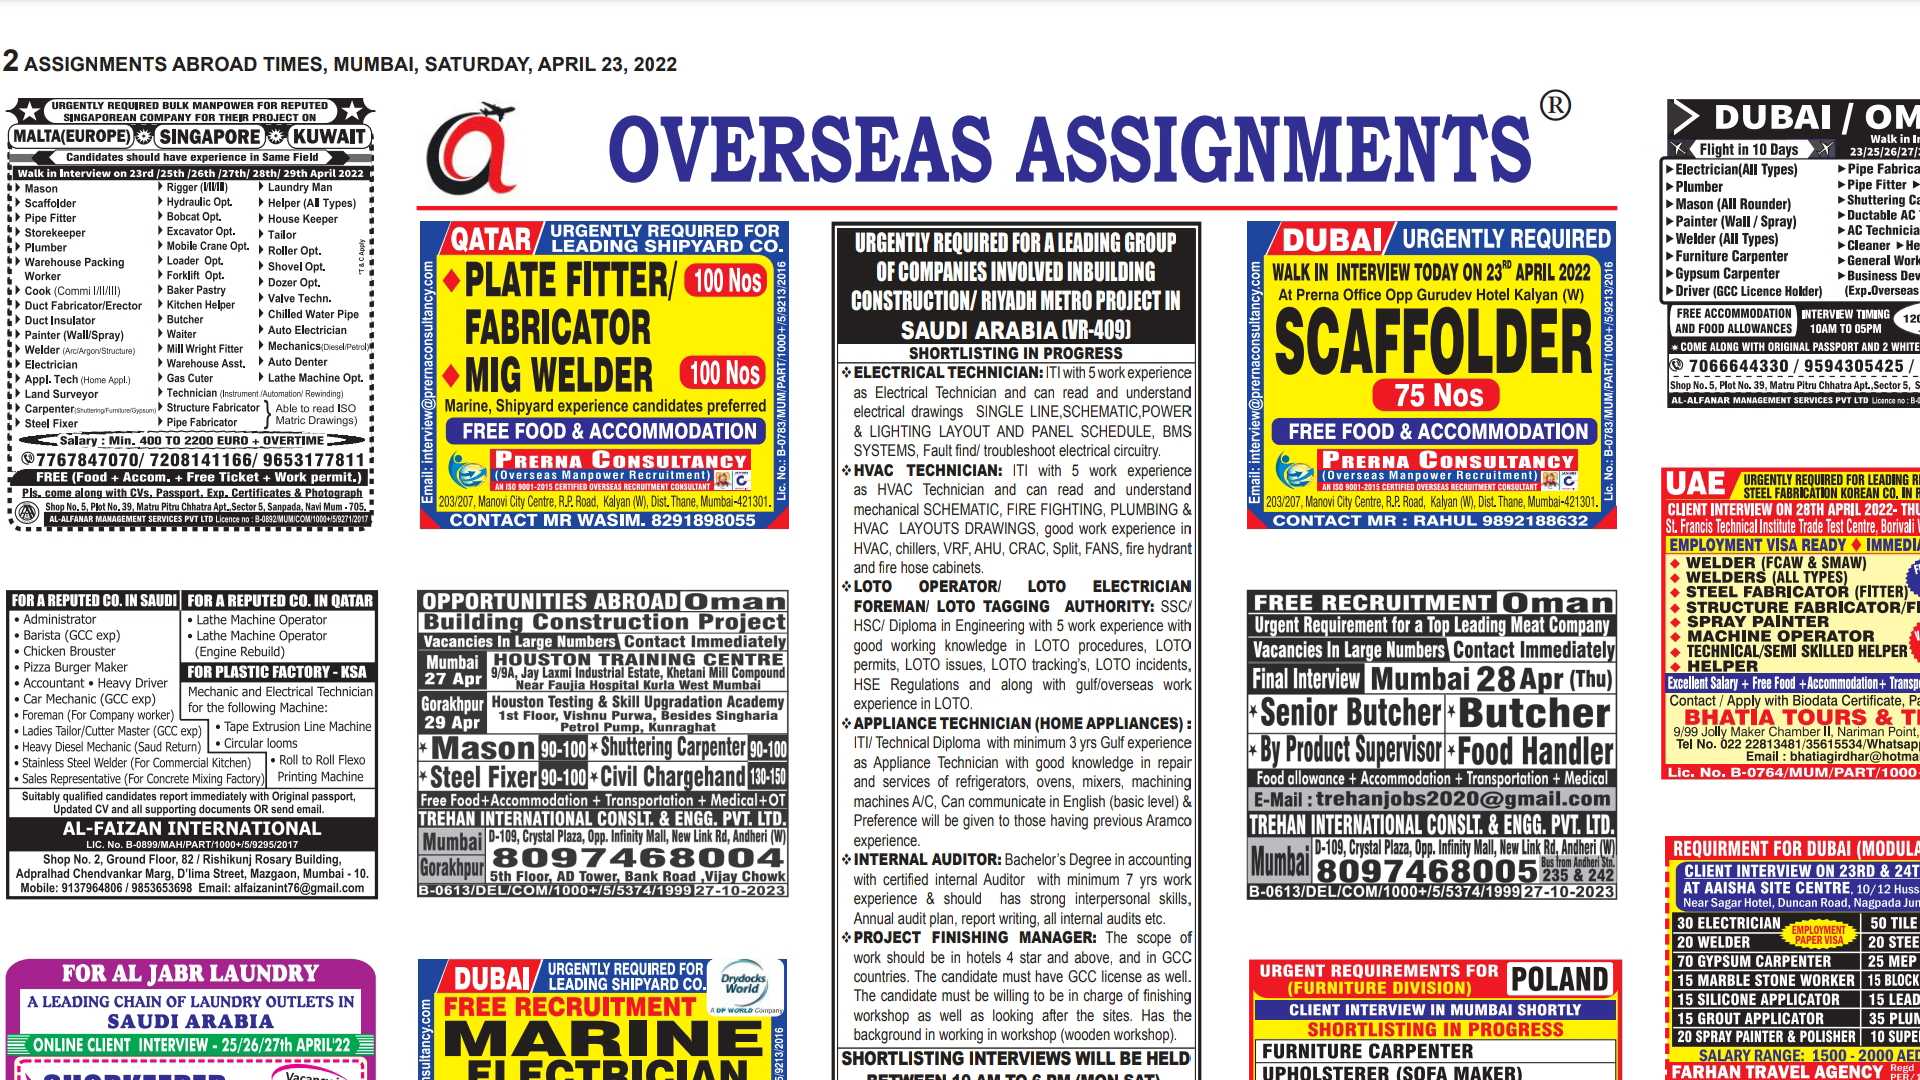 assignment abroad times newspaper pdf download